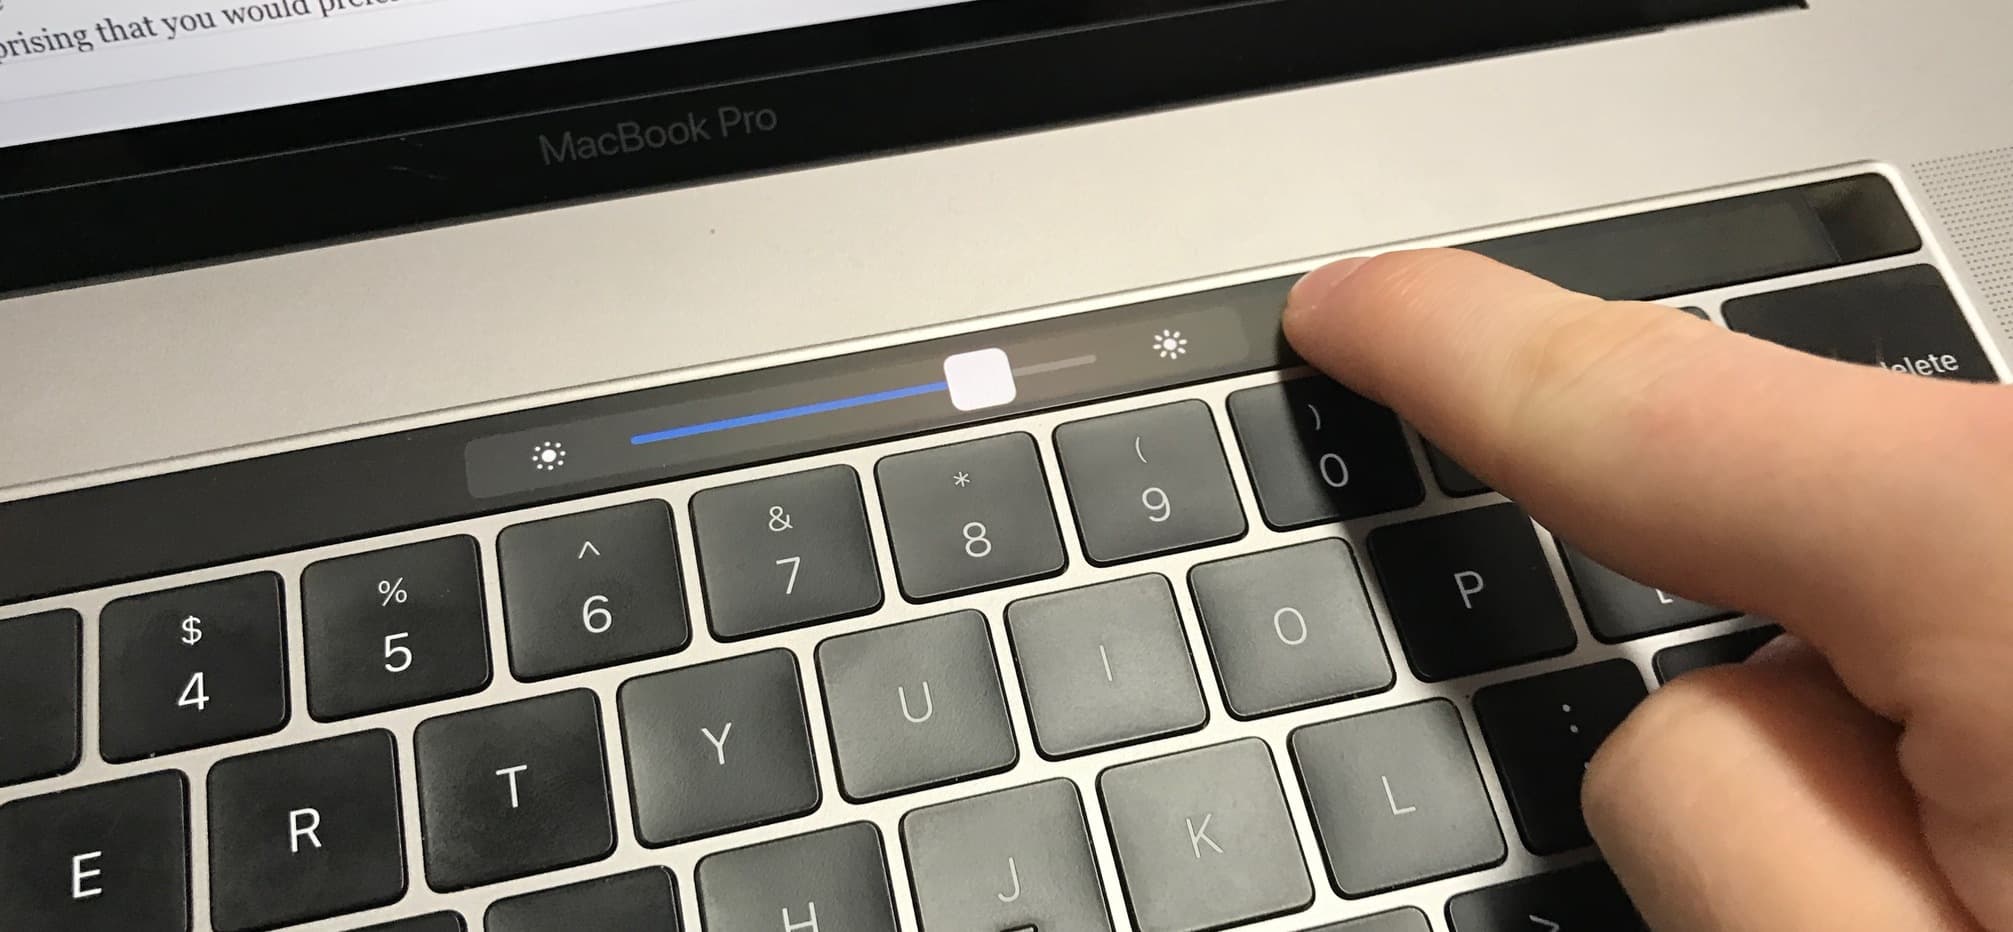 Interacting with Touch Bar on MacBook